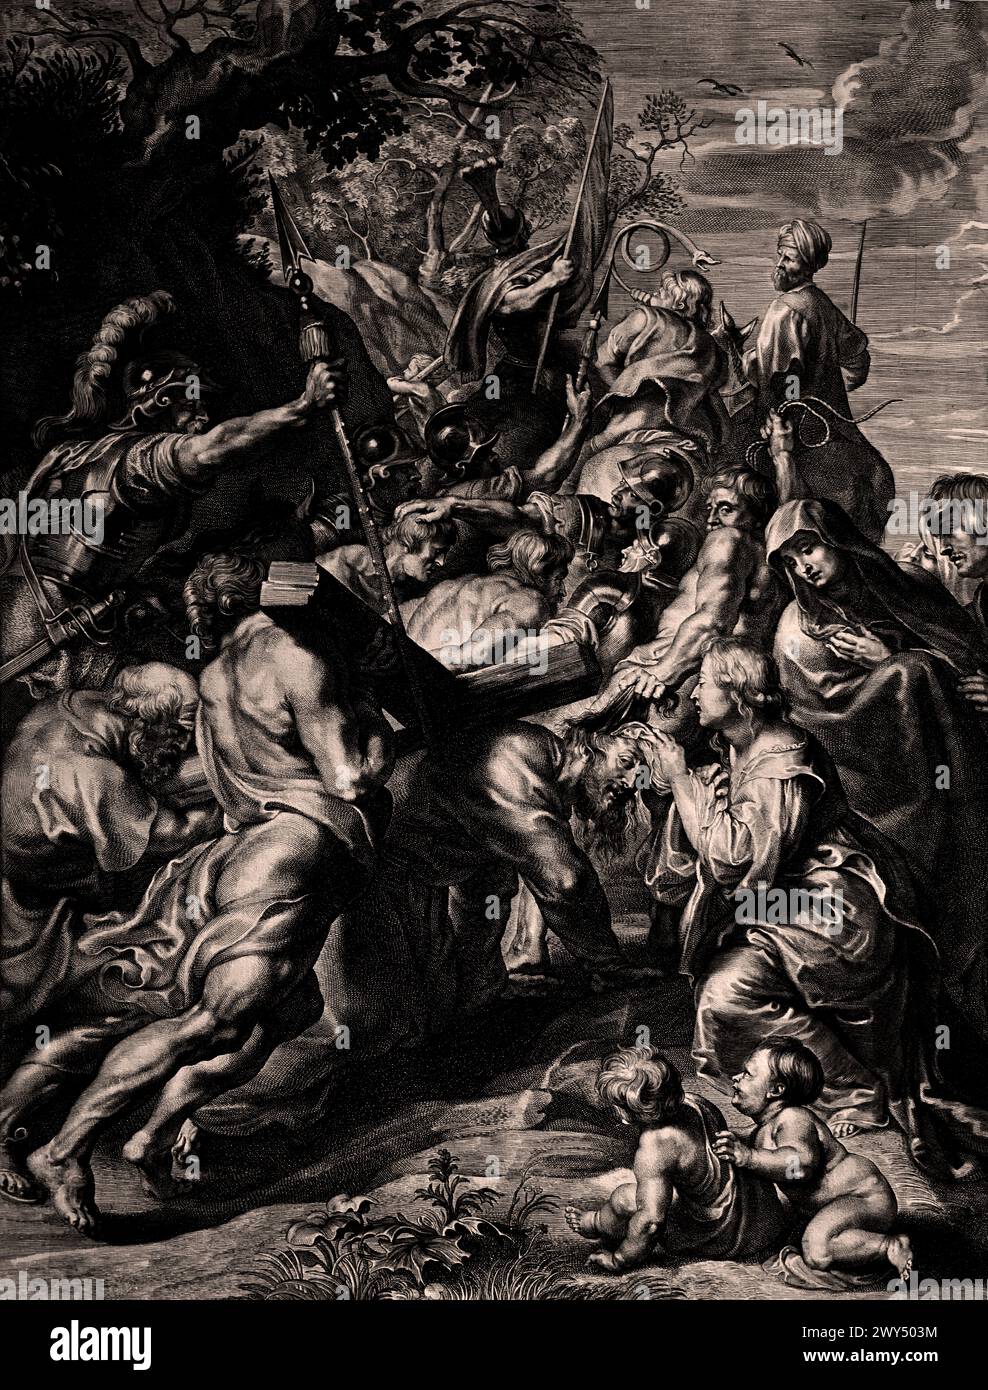 Kruisdraging - Bearing the cross 1632 Peter Paul Rubens,by Paulus Pontius (May 1603 – 16 January 1658) was a Flemish engraver and painter.  He worked with the artists Peter Paul Rubens and Anthony van Dyck Royal Museum of Fine Arts,  Antwerp, Belgium, Belgian. Stock Photo